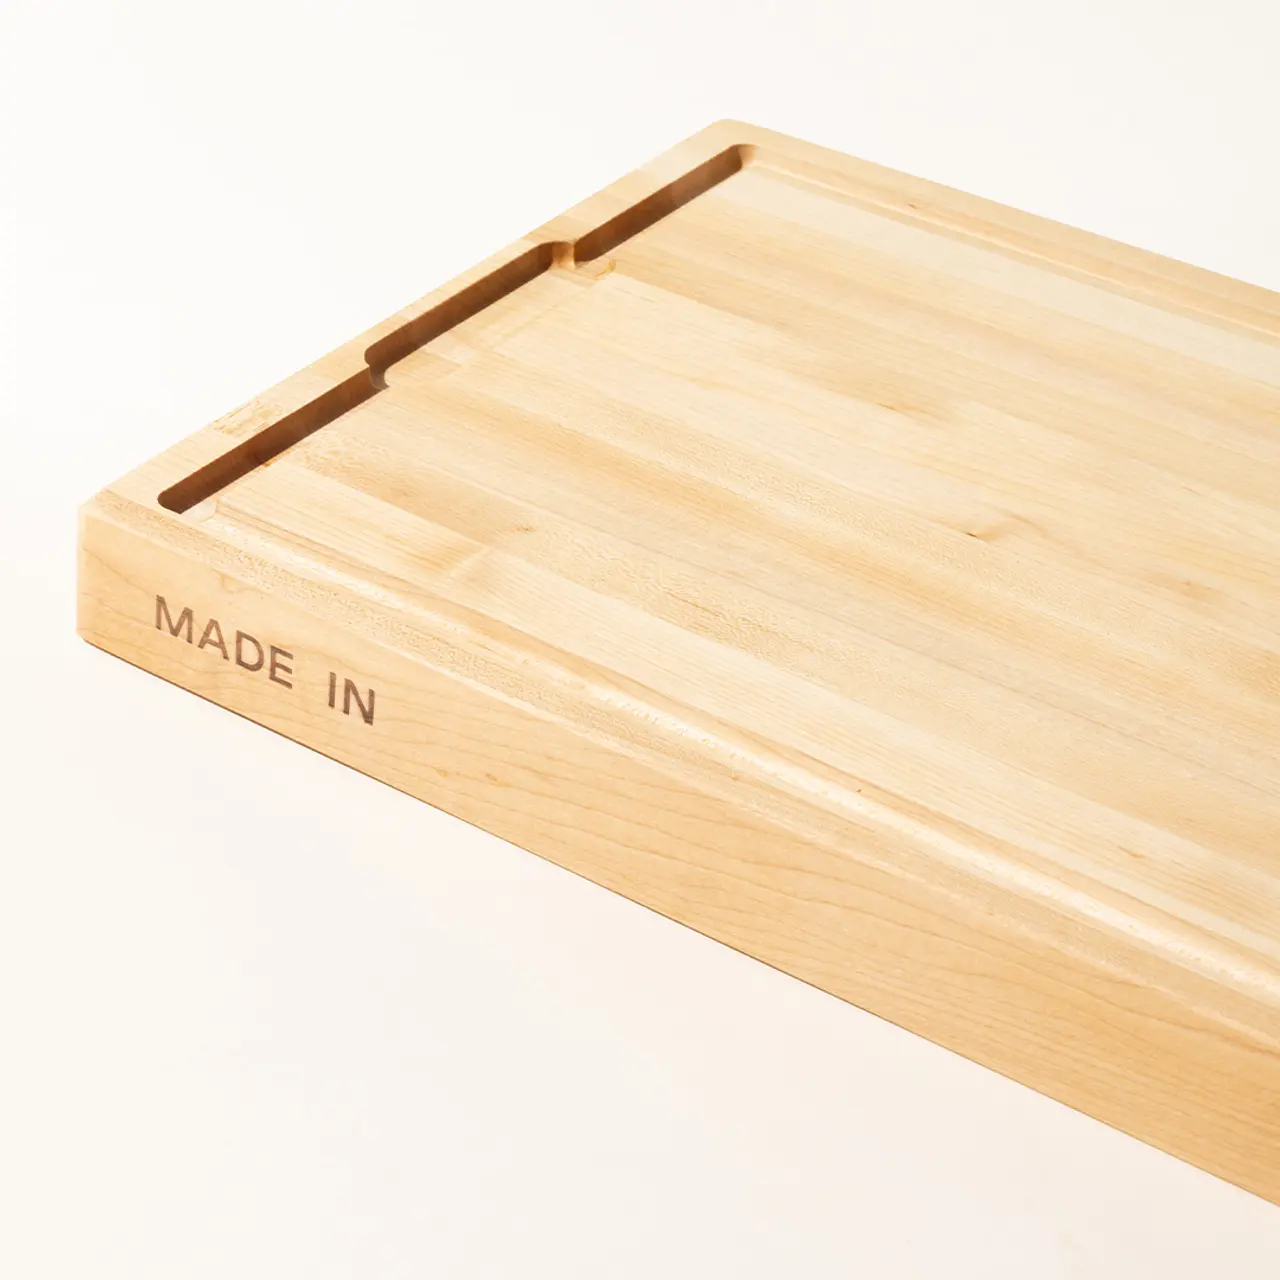 A close-up of a wooden cutting board with a juice groove and the words "MADE IN" stamped on the side.